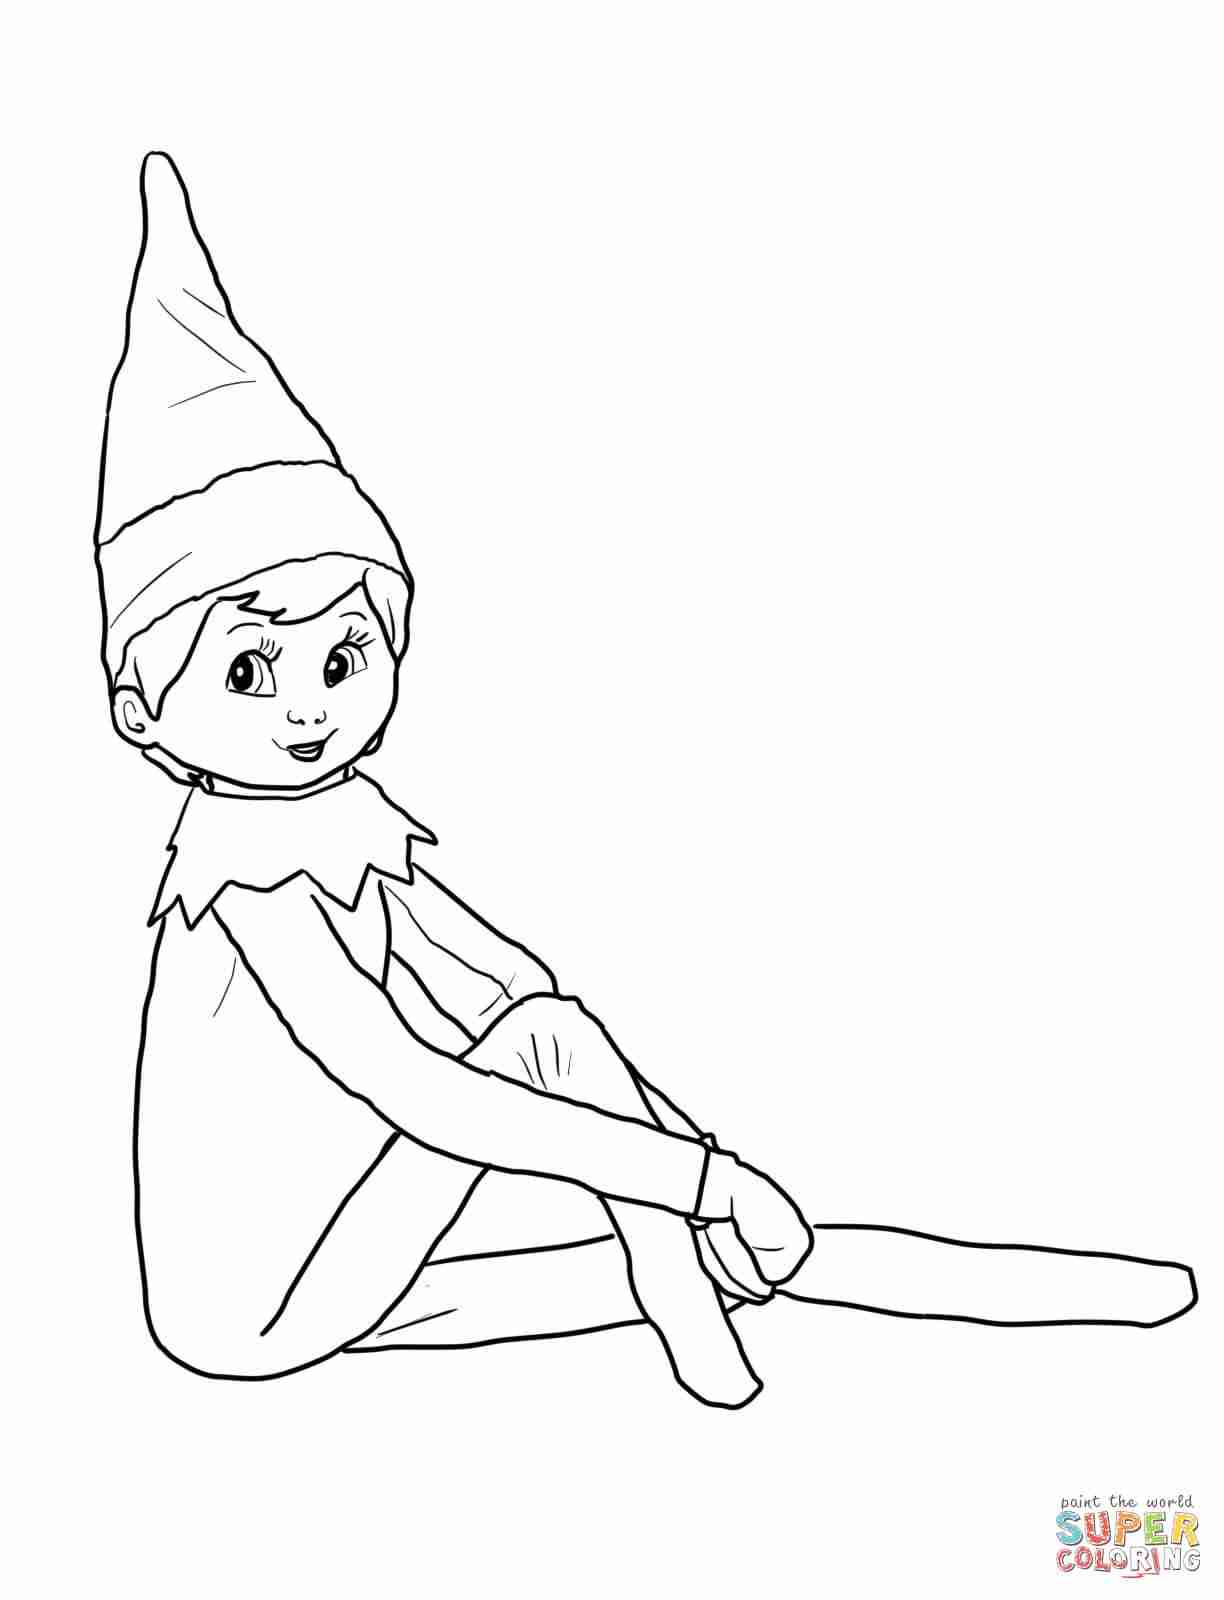 Night Elf Coloring Pages at GetDrawings.com | Free for personal use